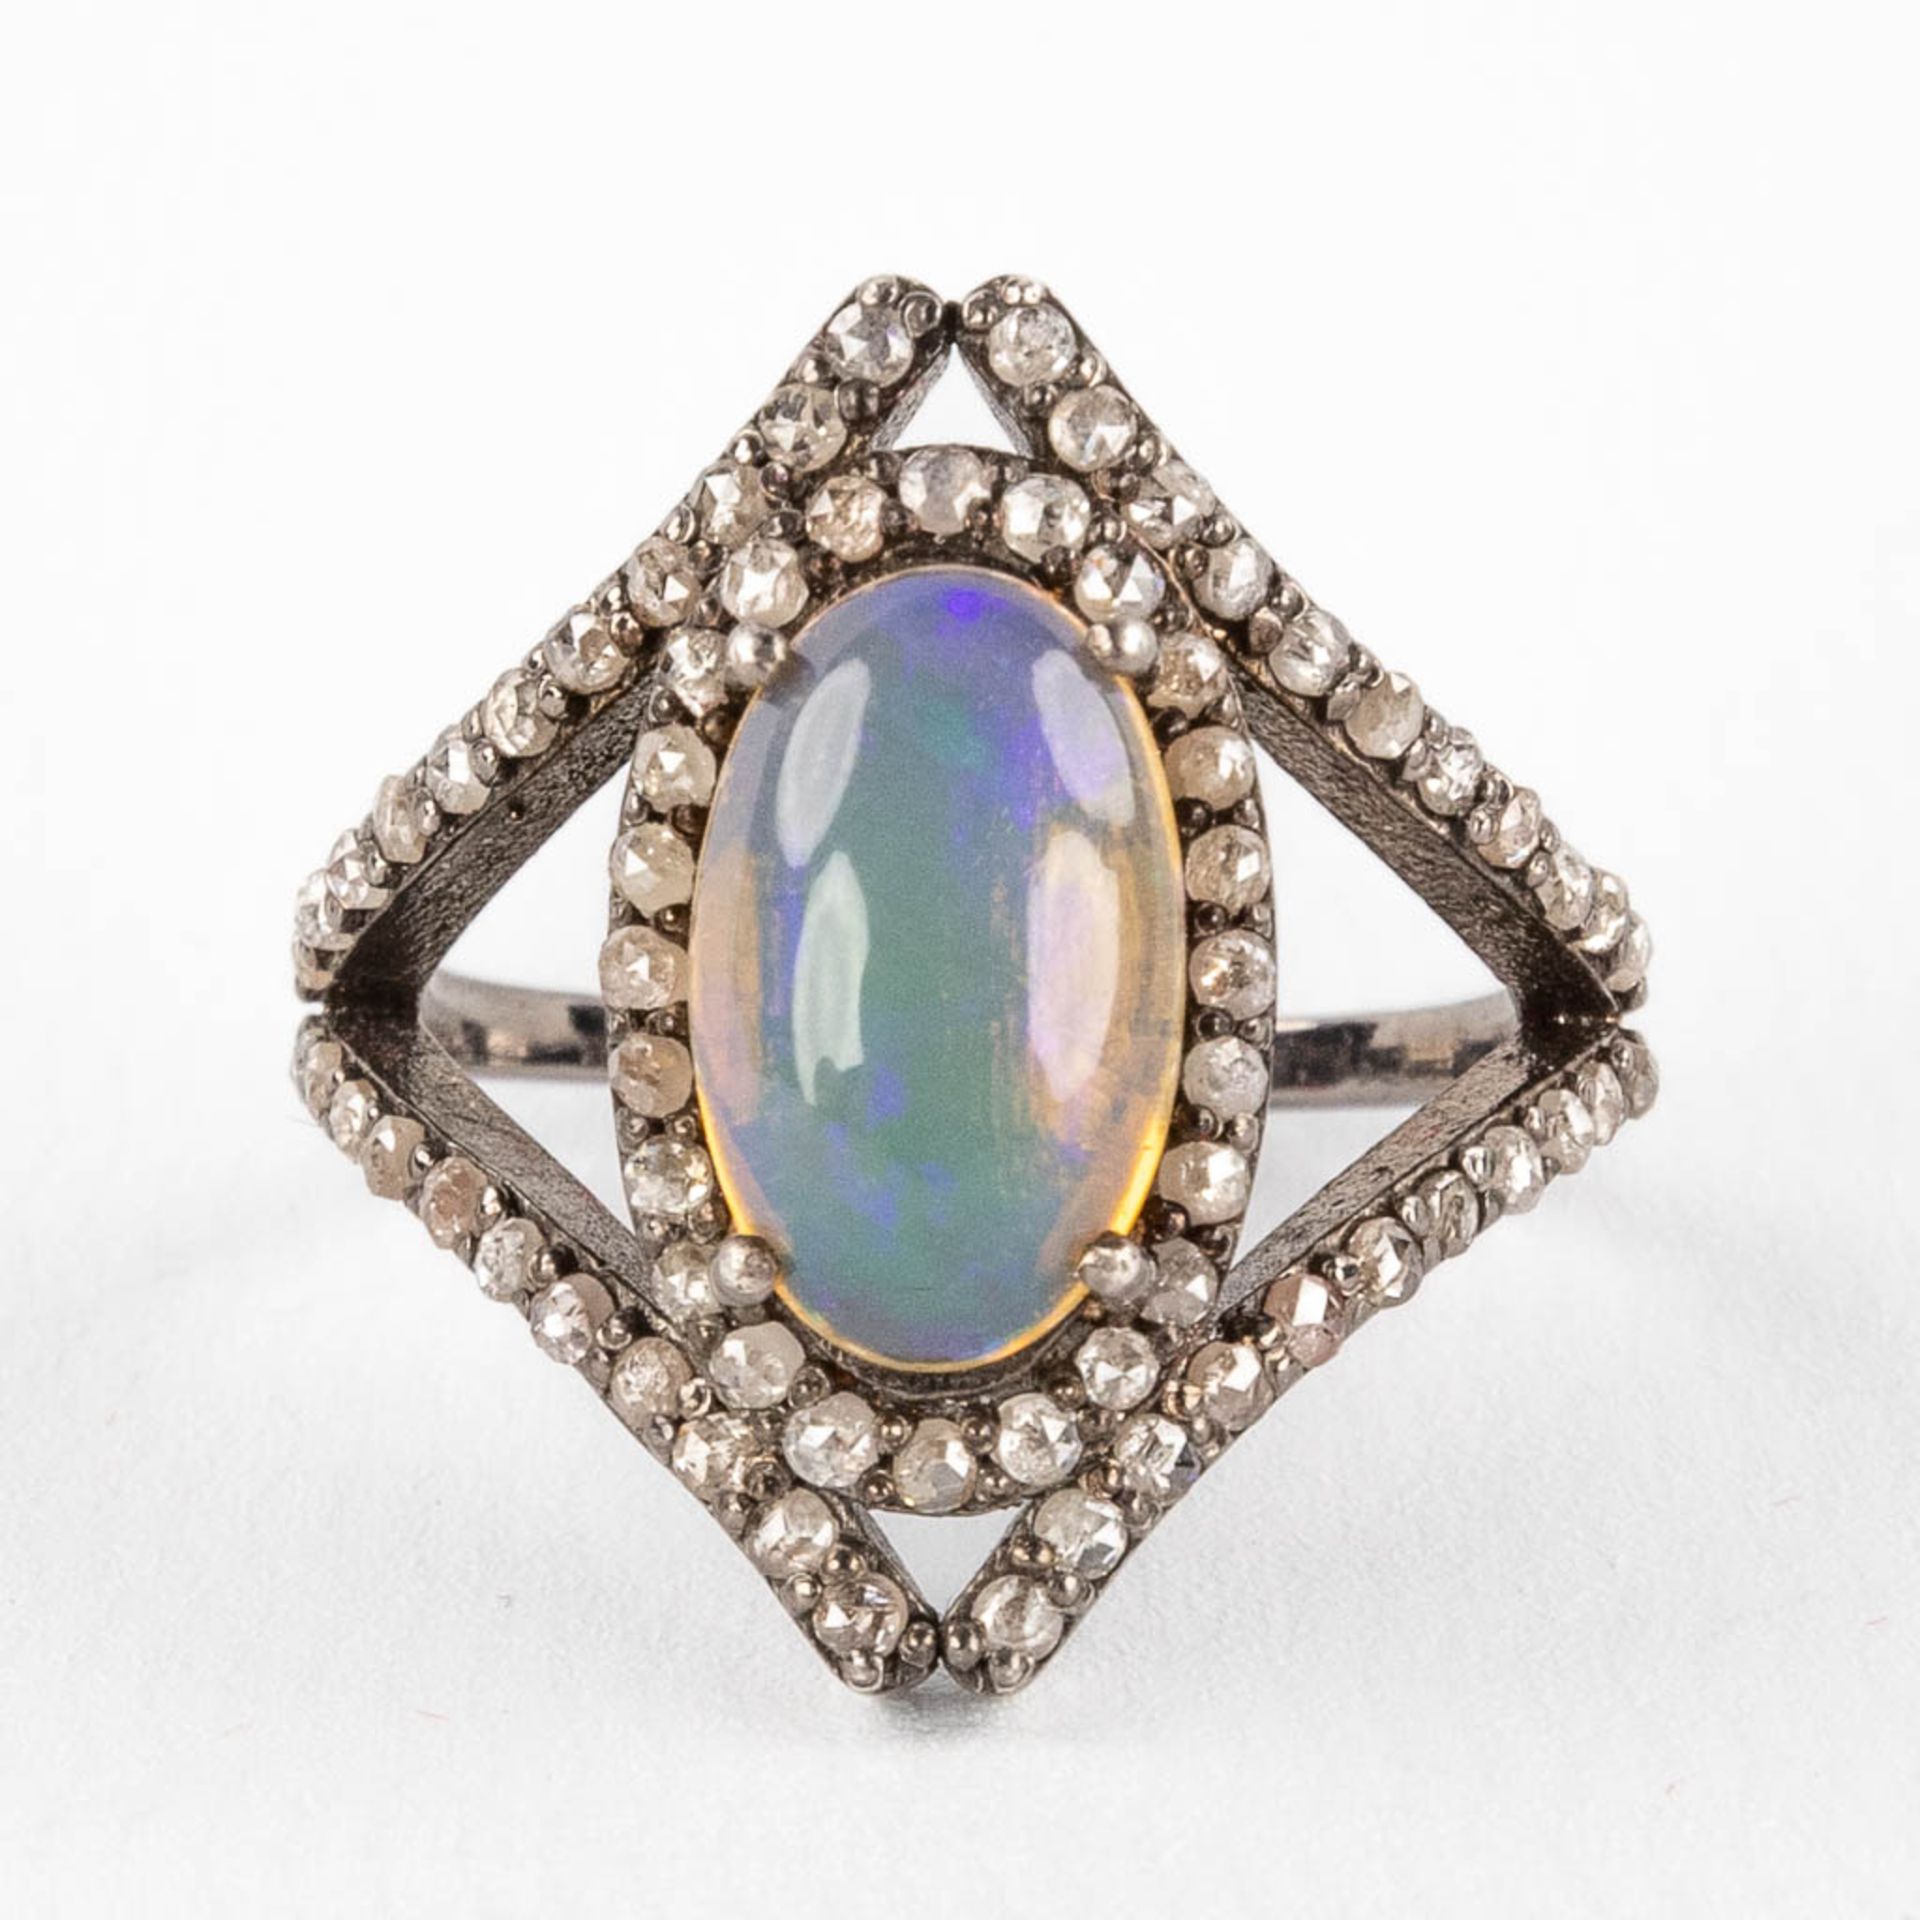 A ring with central opal stone and uncut diamonds, silver. 6,43g. Ring size 63. - Image 5 of 9